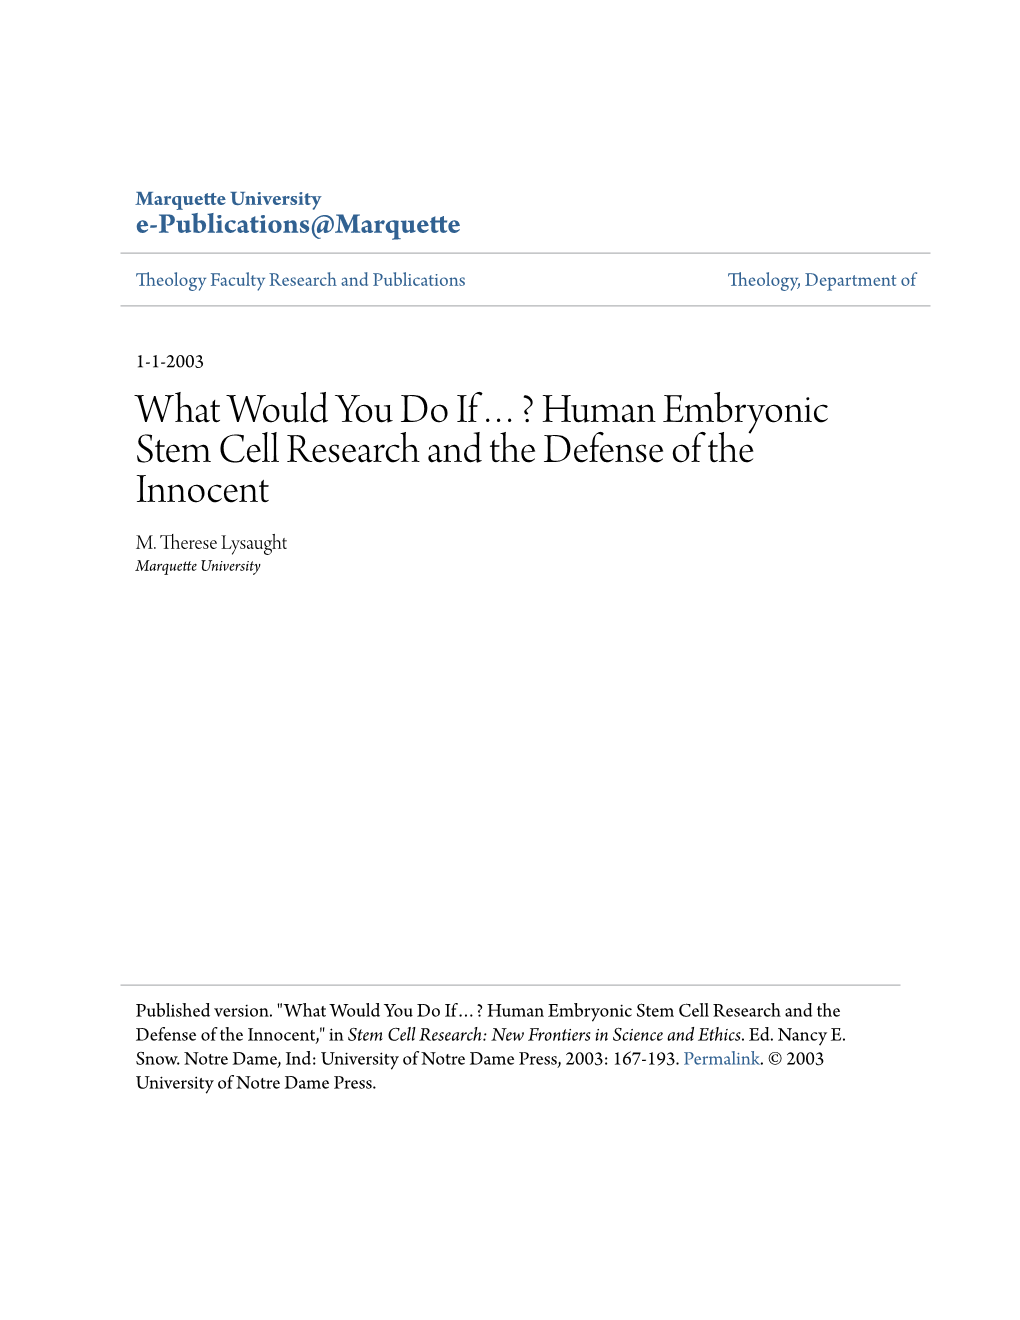 Human Embryonic Stem Cell Research and the Defense of the Innocent M